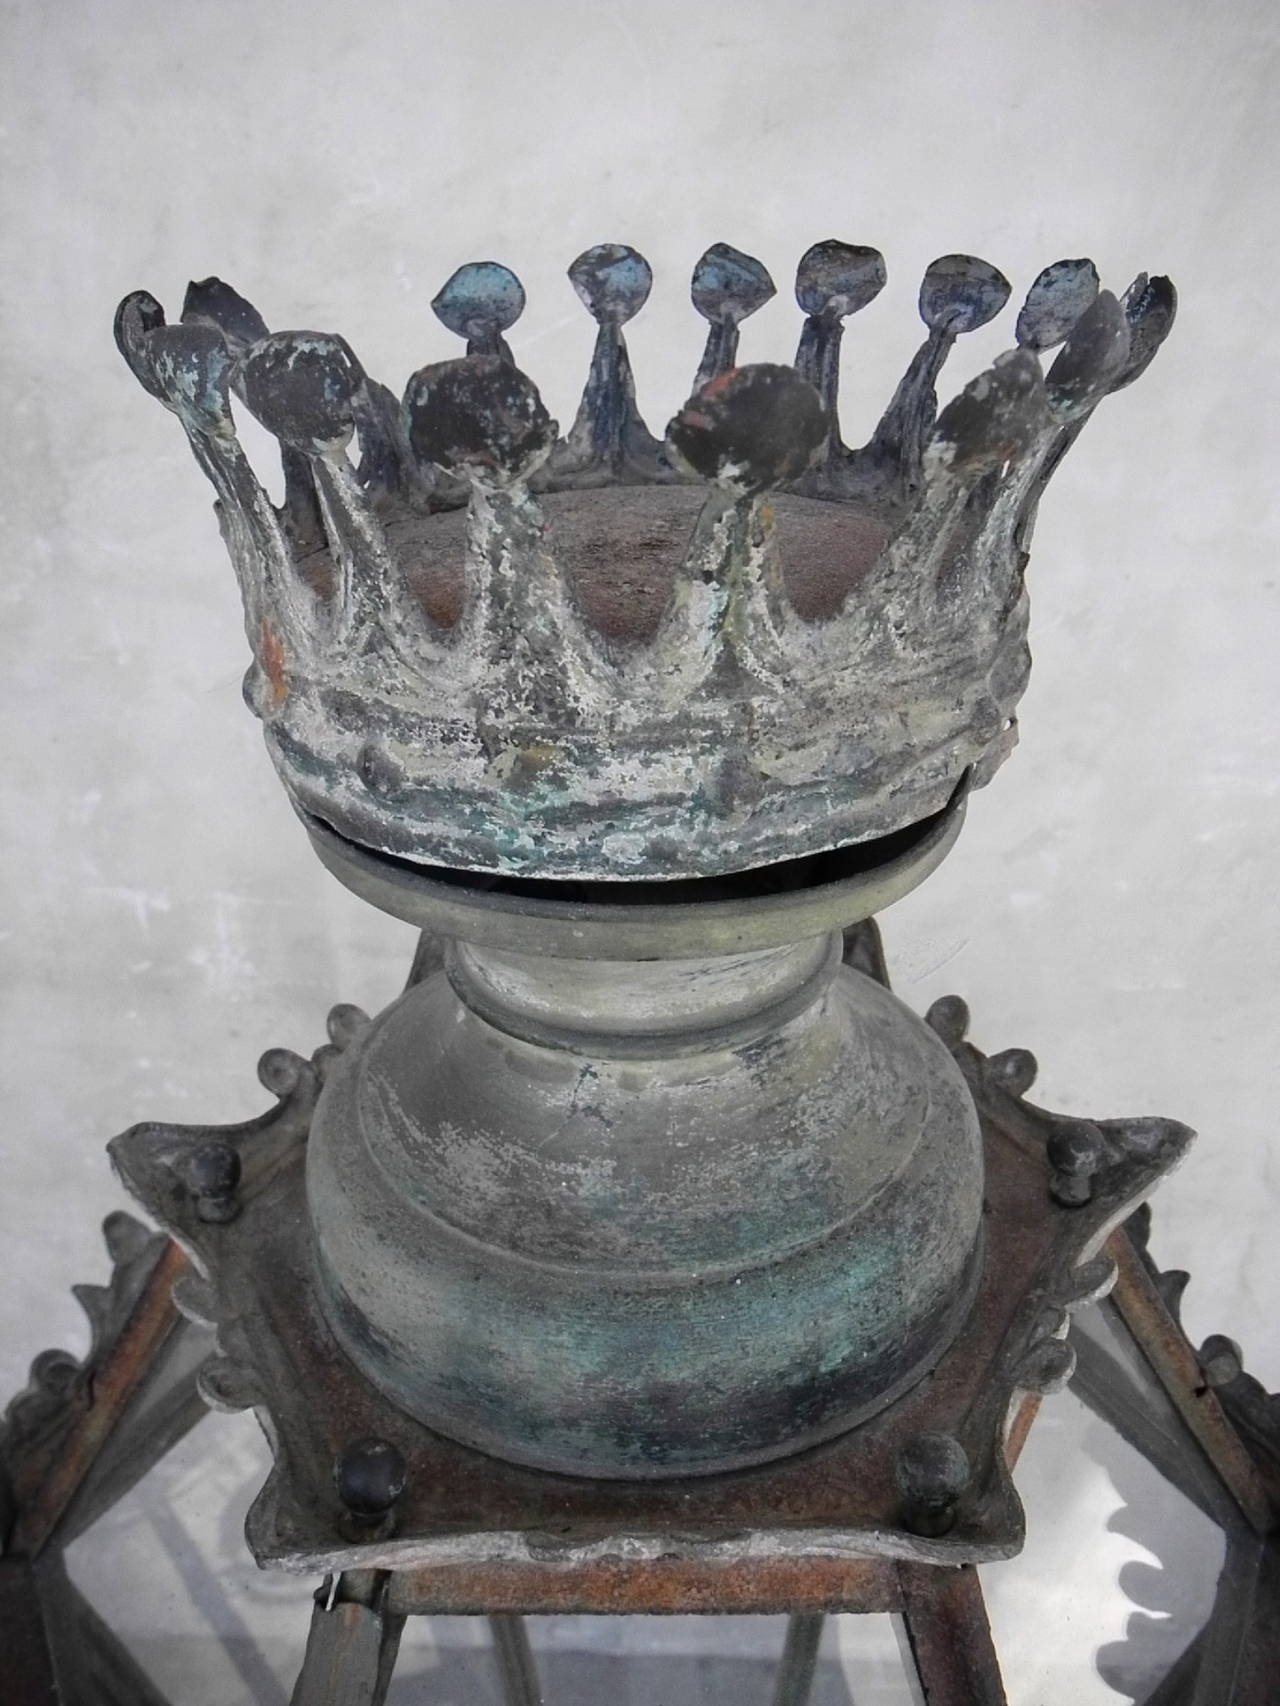 This 19th century Spanish lantern, topped with a large hand-hammered crown, originally hung in a casa important in Madrid, Spain. At over three feet in height, the monumental size of this lantern makes it an intriguing find. This unique item would